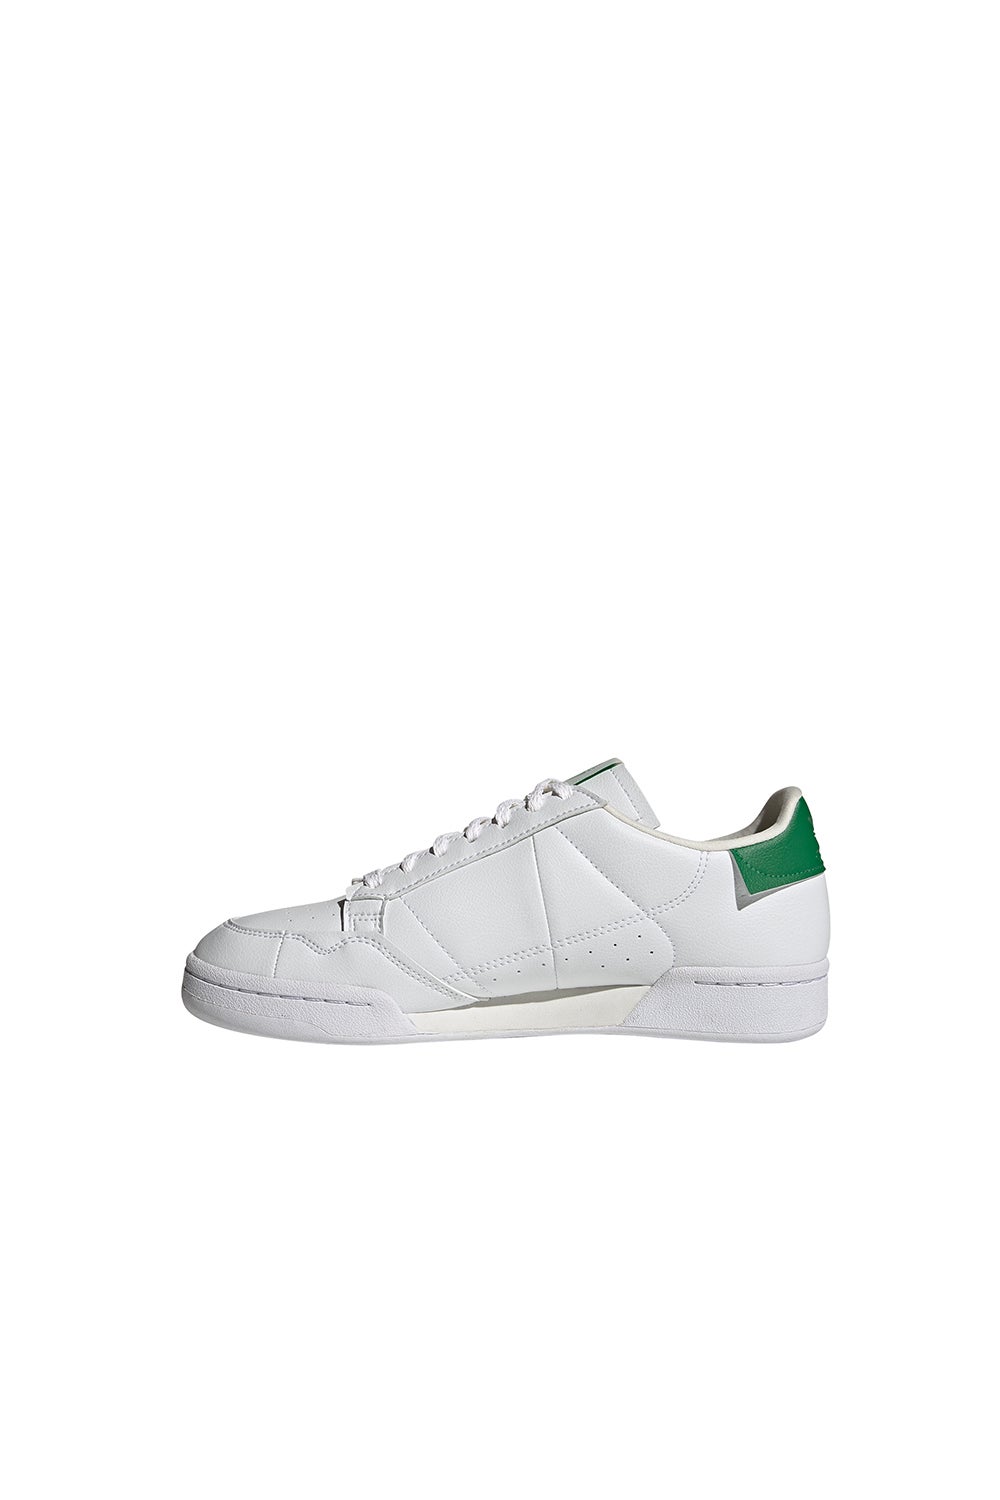 adidas Continental 80 Cloud White/Off White/Green